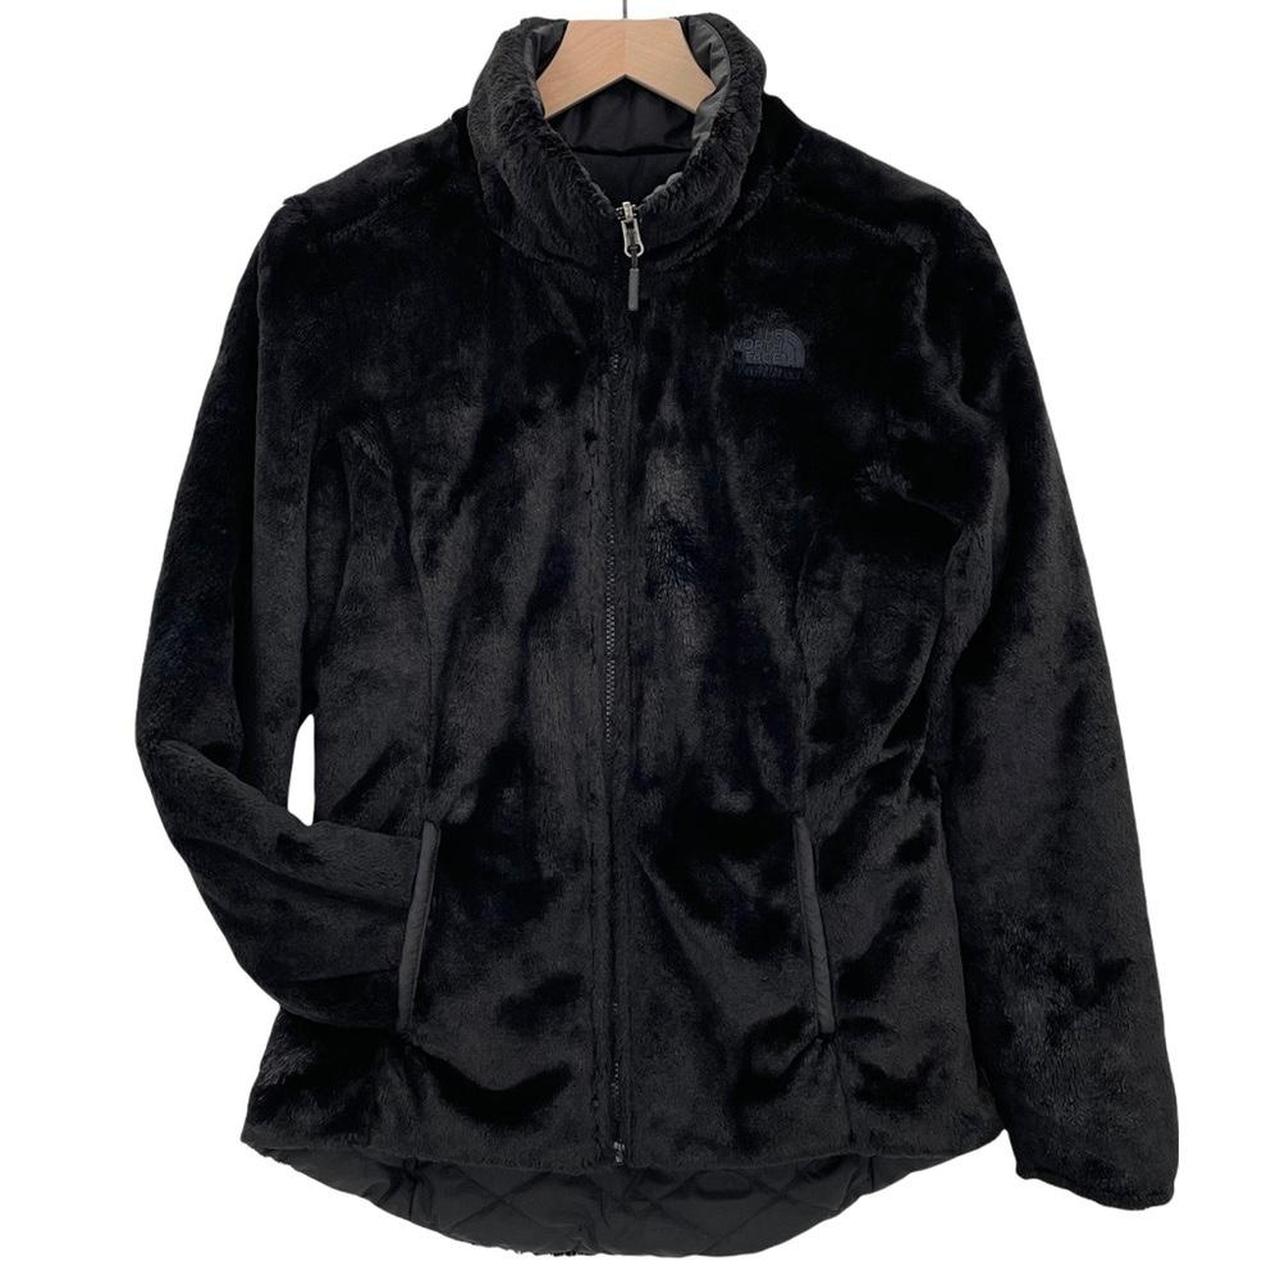 Product Image 2 - The North Face Women's Mossbud